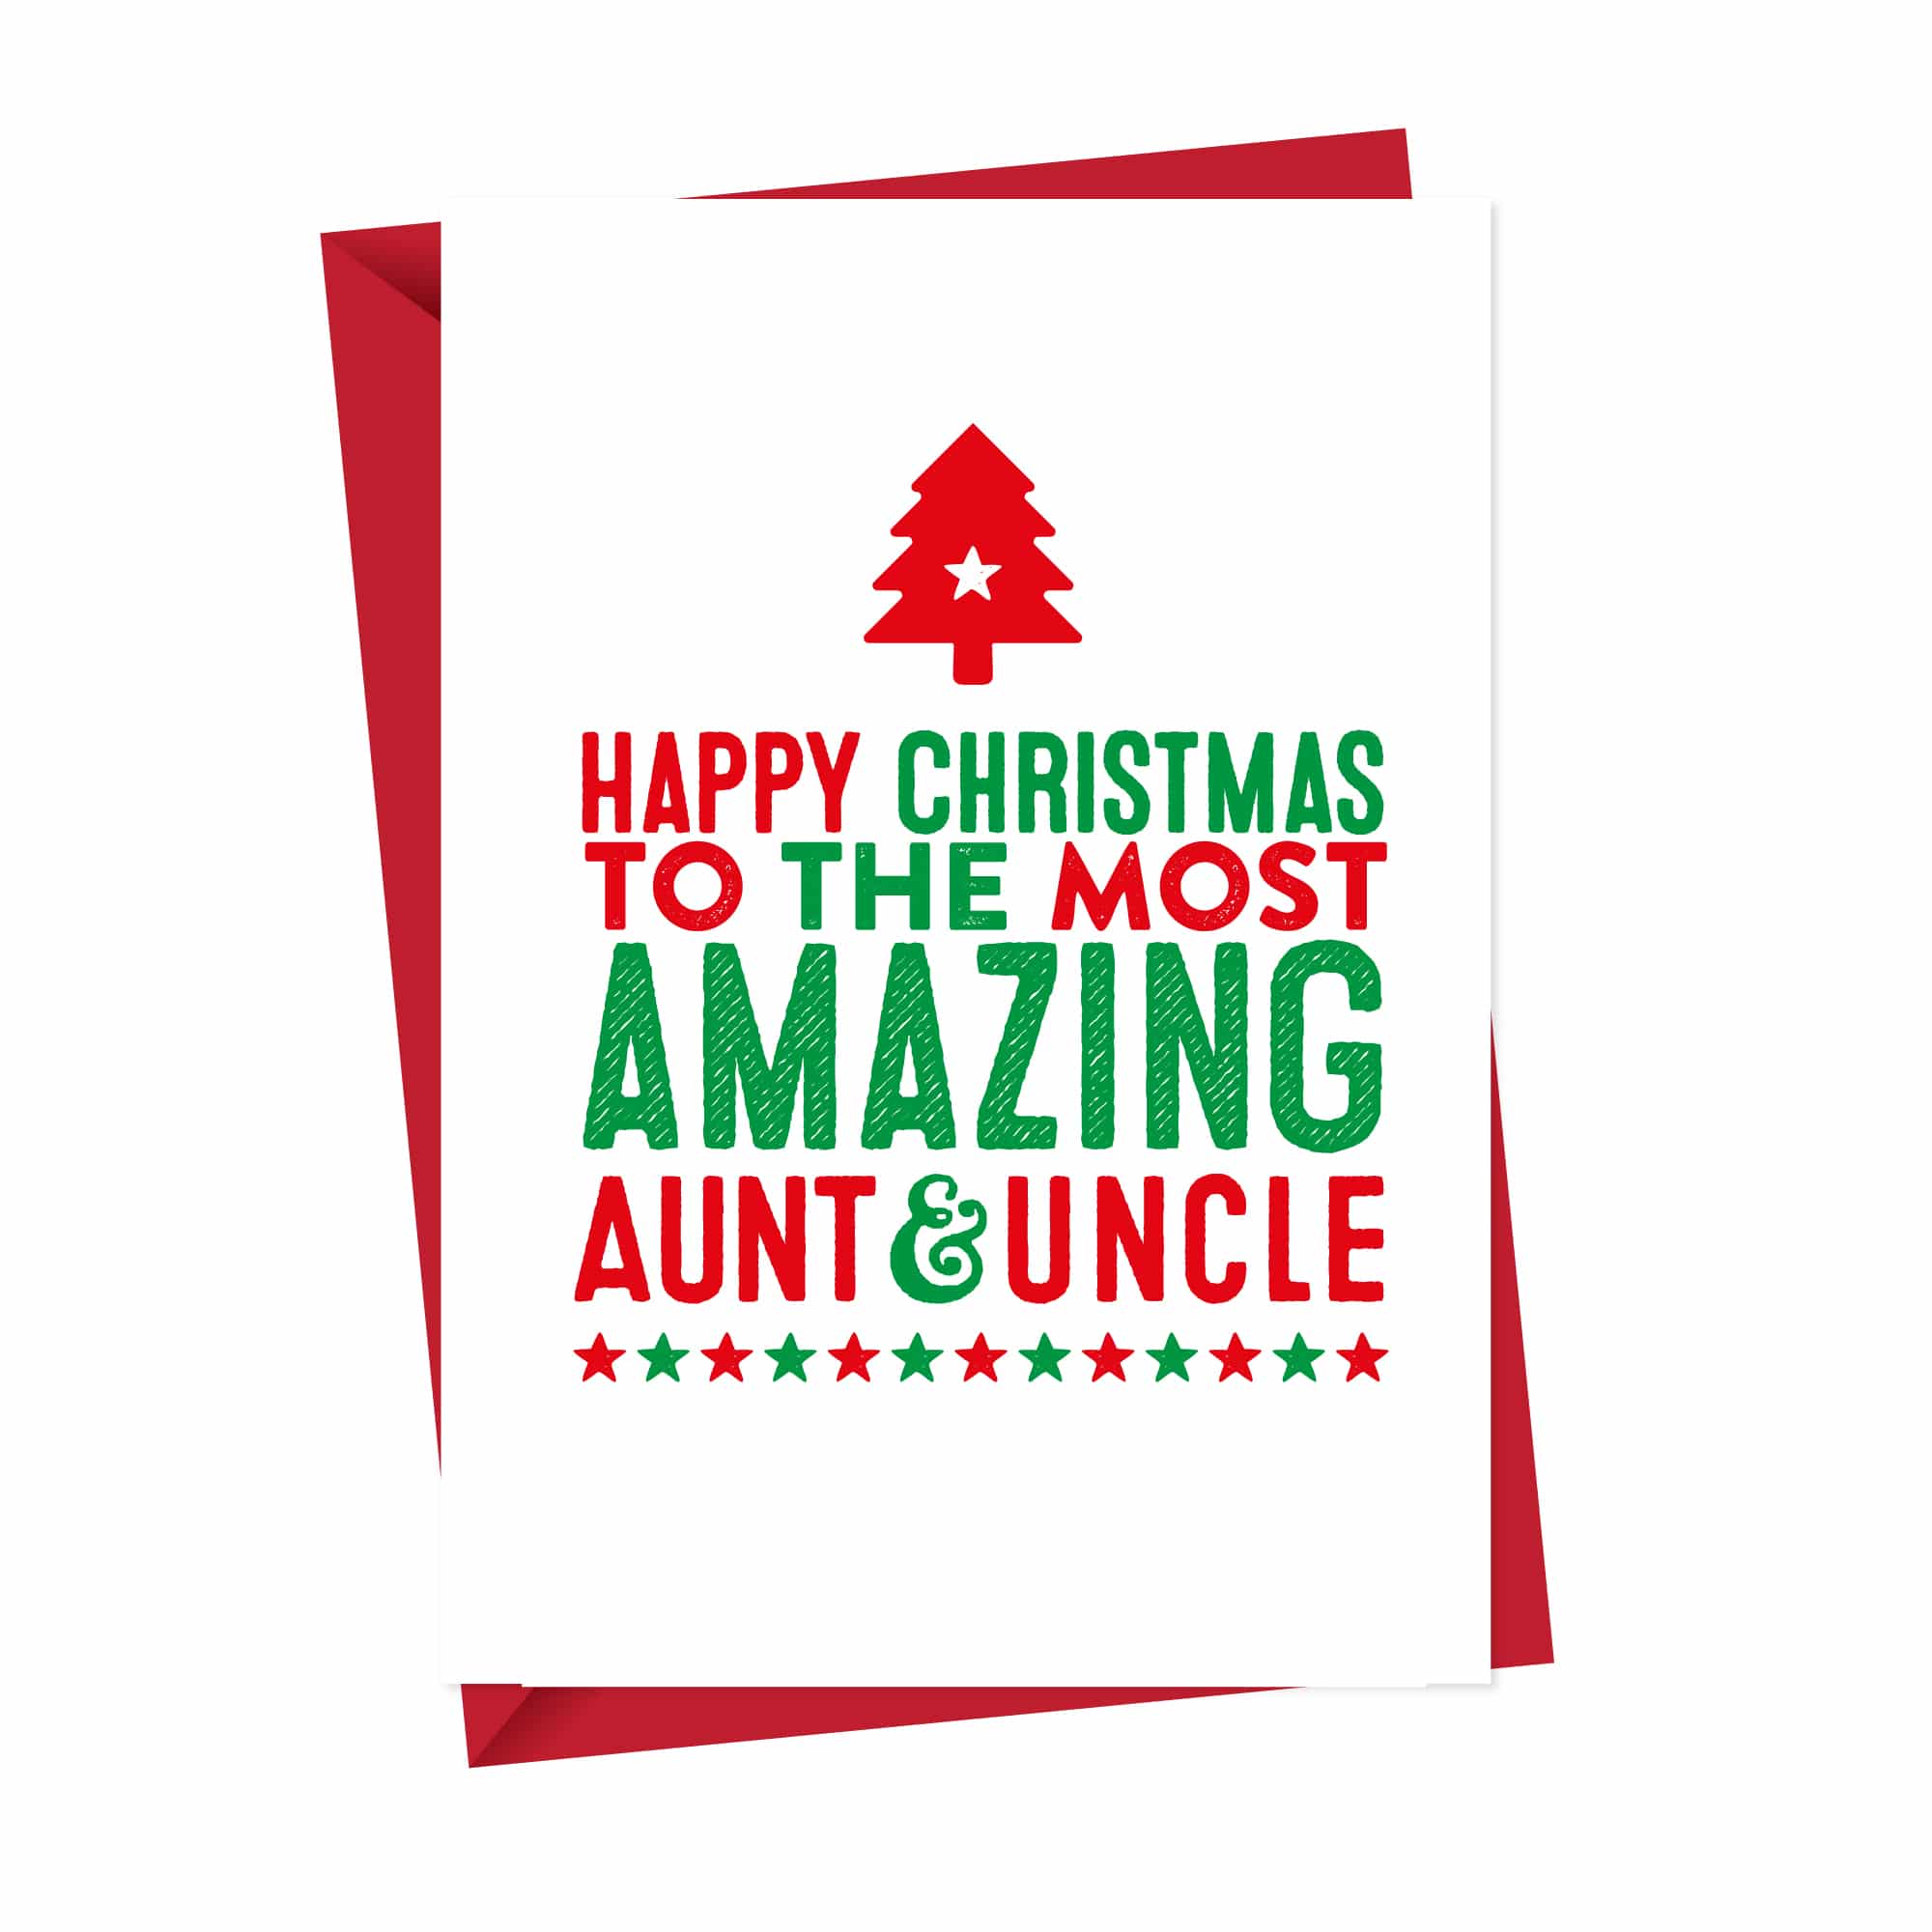 Amazing Aunt & Uncle Christmas Card